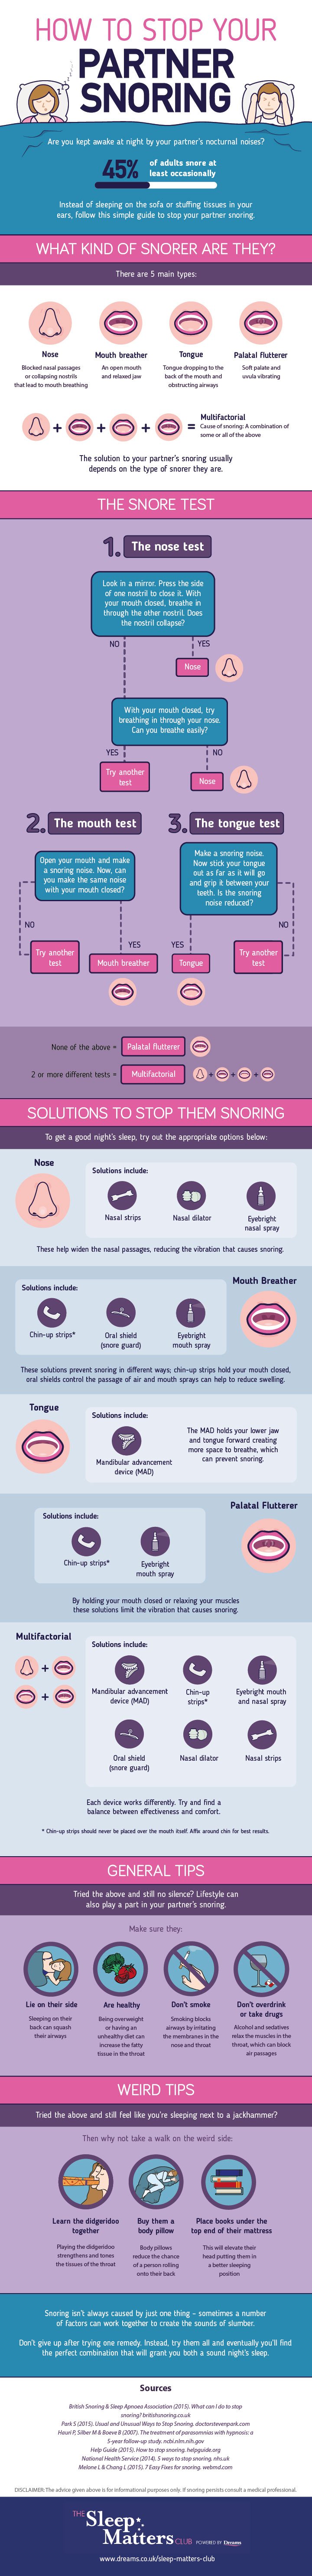 Snoring test and how to stop snoring 